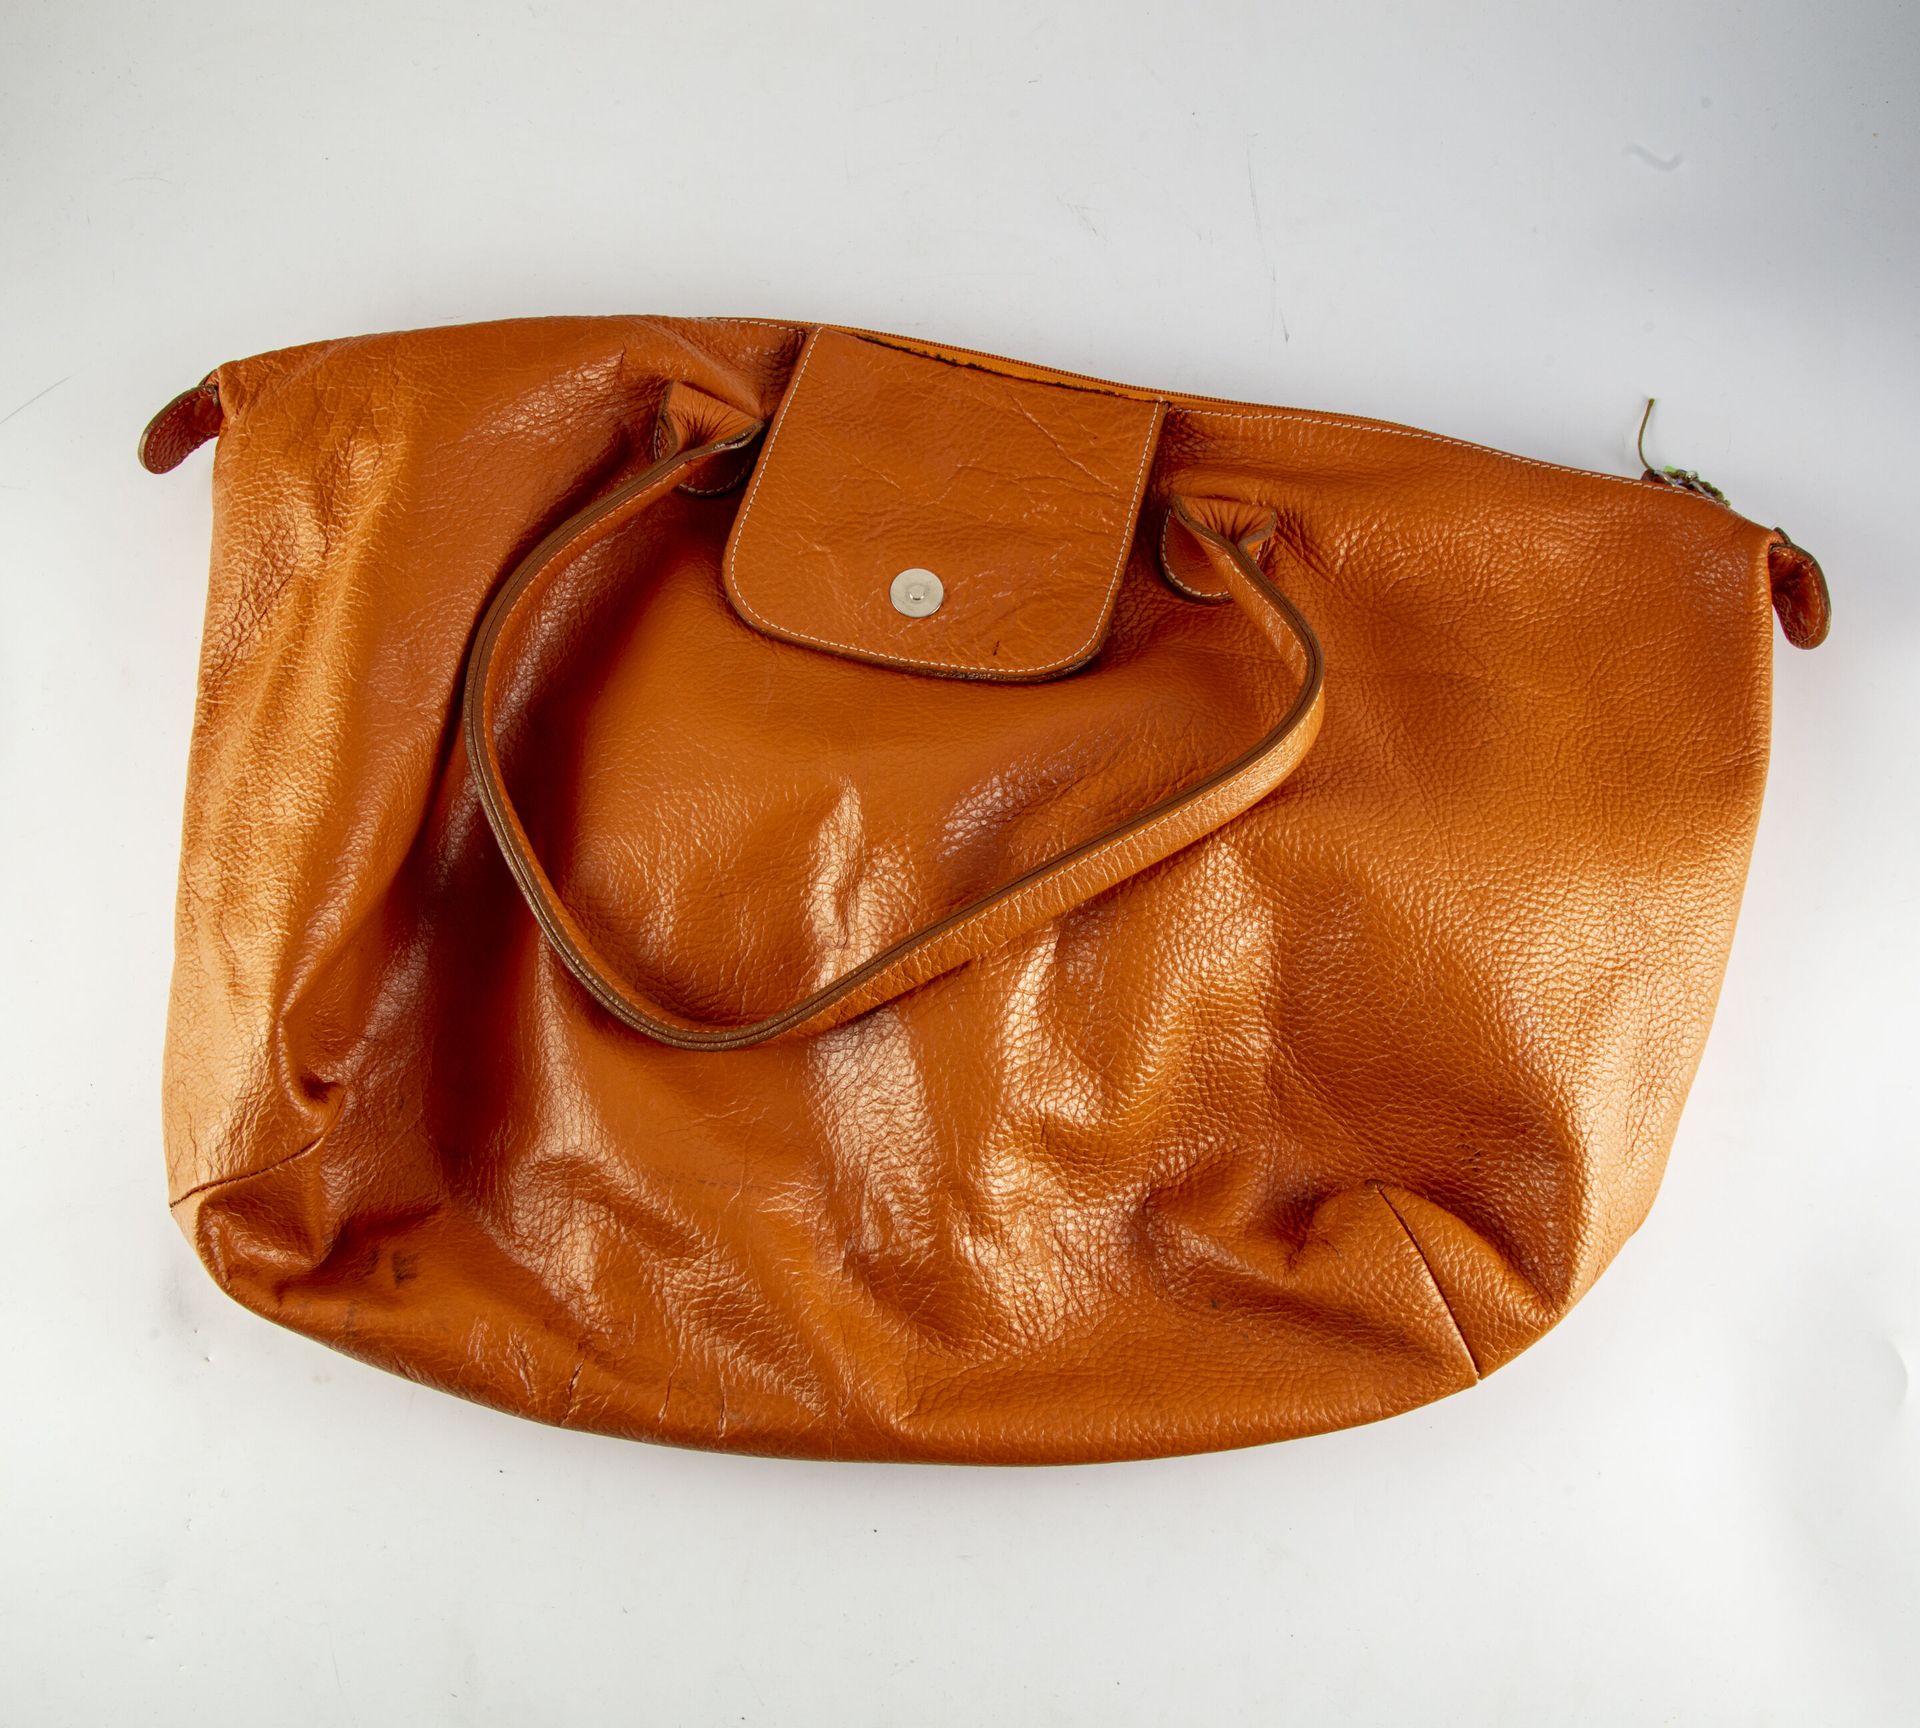 Null Small hand travel bag in orange leather
L. : 41 cm 
Little wear and tear